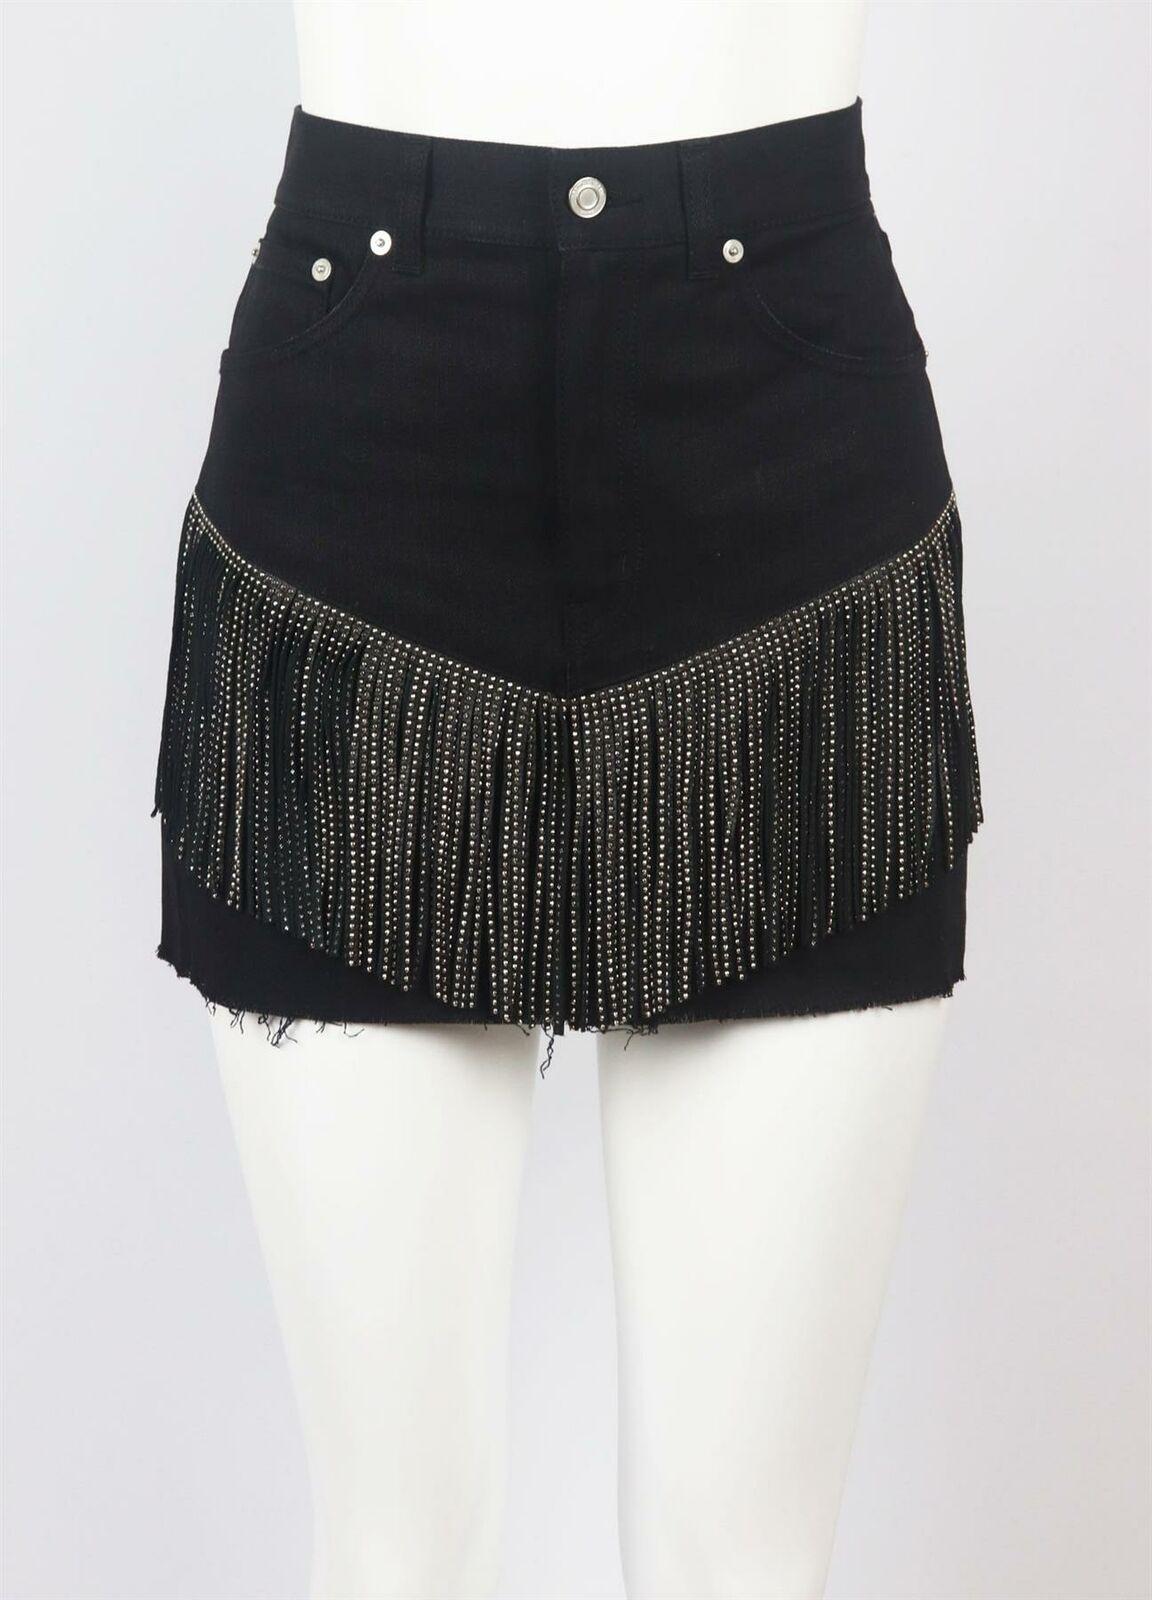 Saint Laurent's black denim mini skirt has a western-inspired feel, it's designed with studded leather fringing and has raw hems that create a cool, undone look.
Black denim, black leather.
Concealed zip and button fastening at front.
98% cotton, 2%